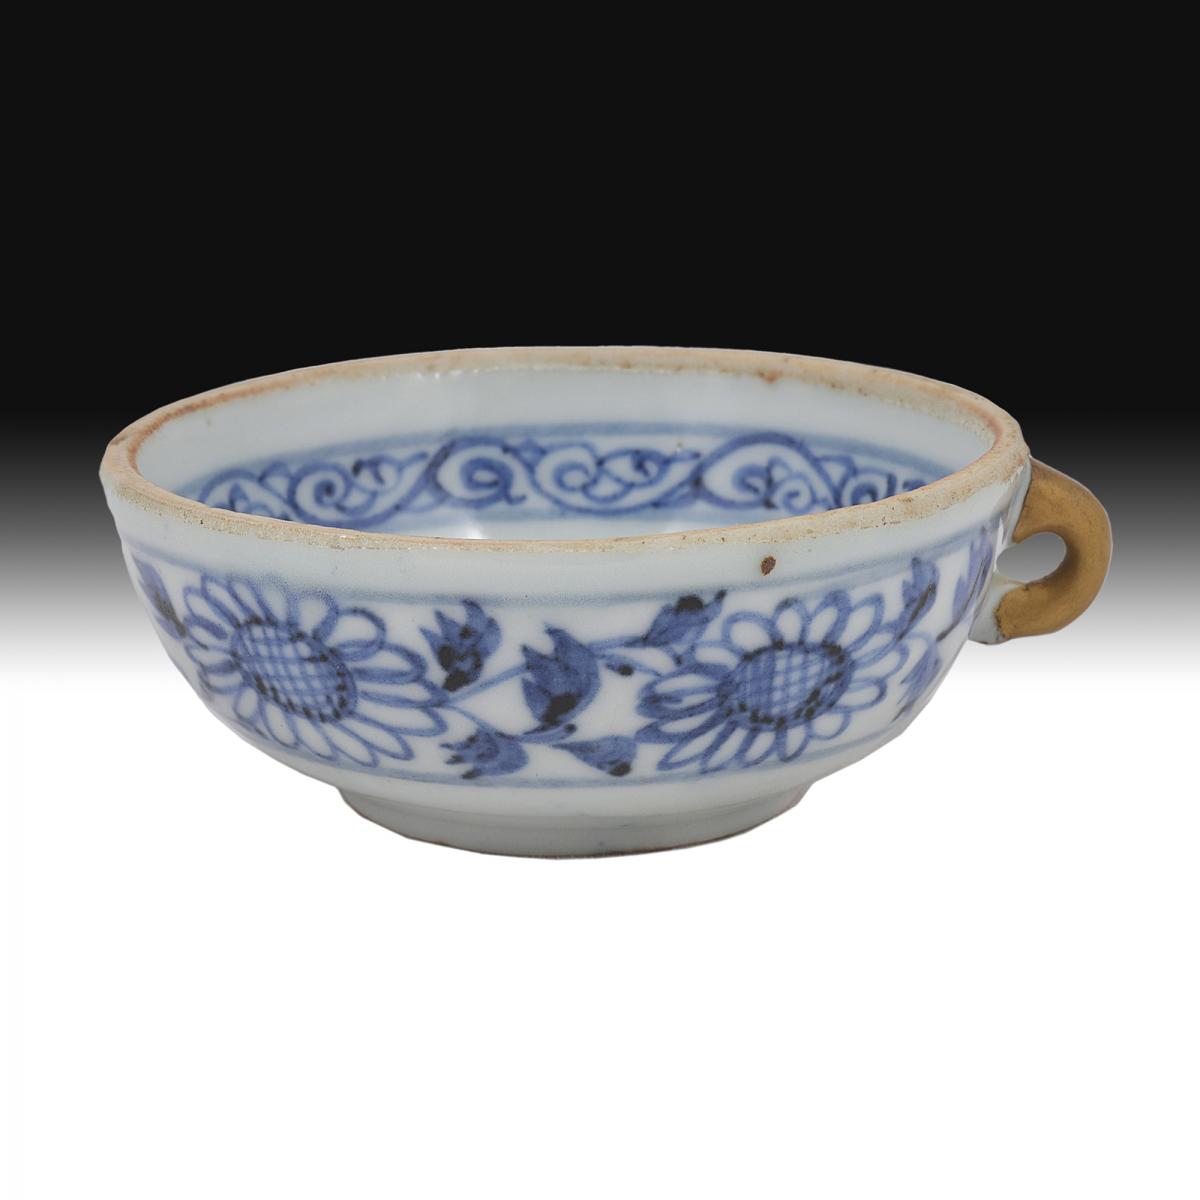 Yuan Blue and white cup with Kintsugi handle